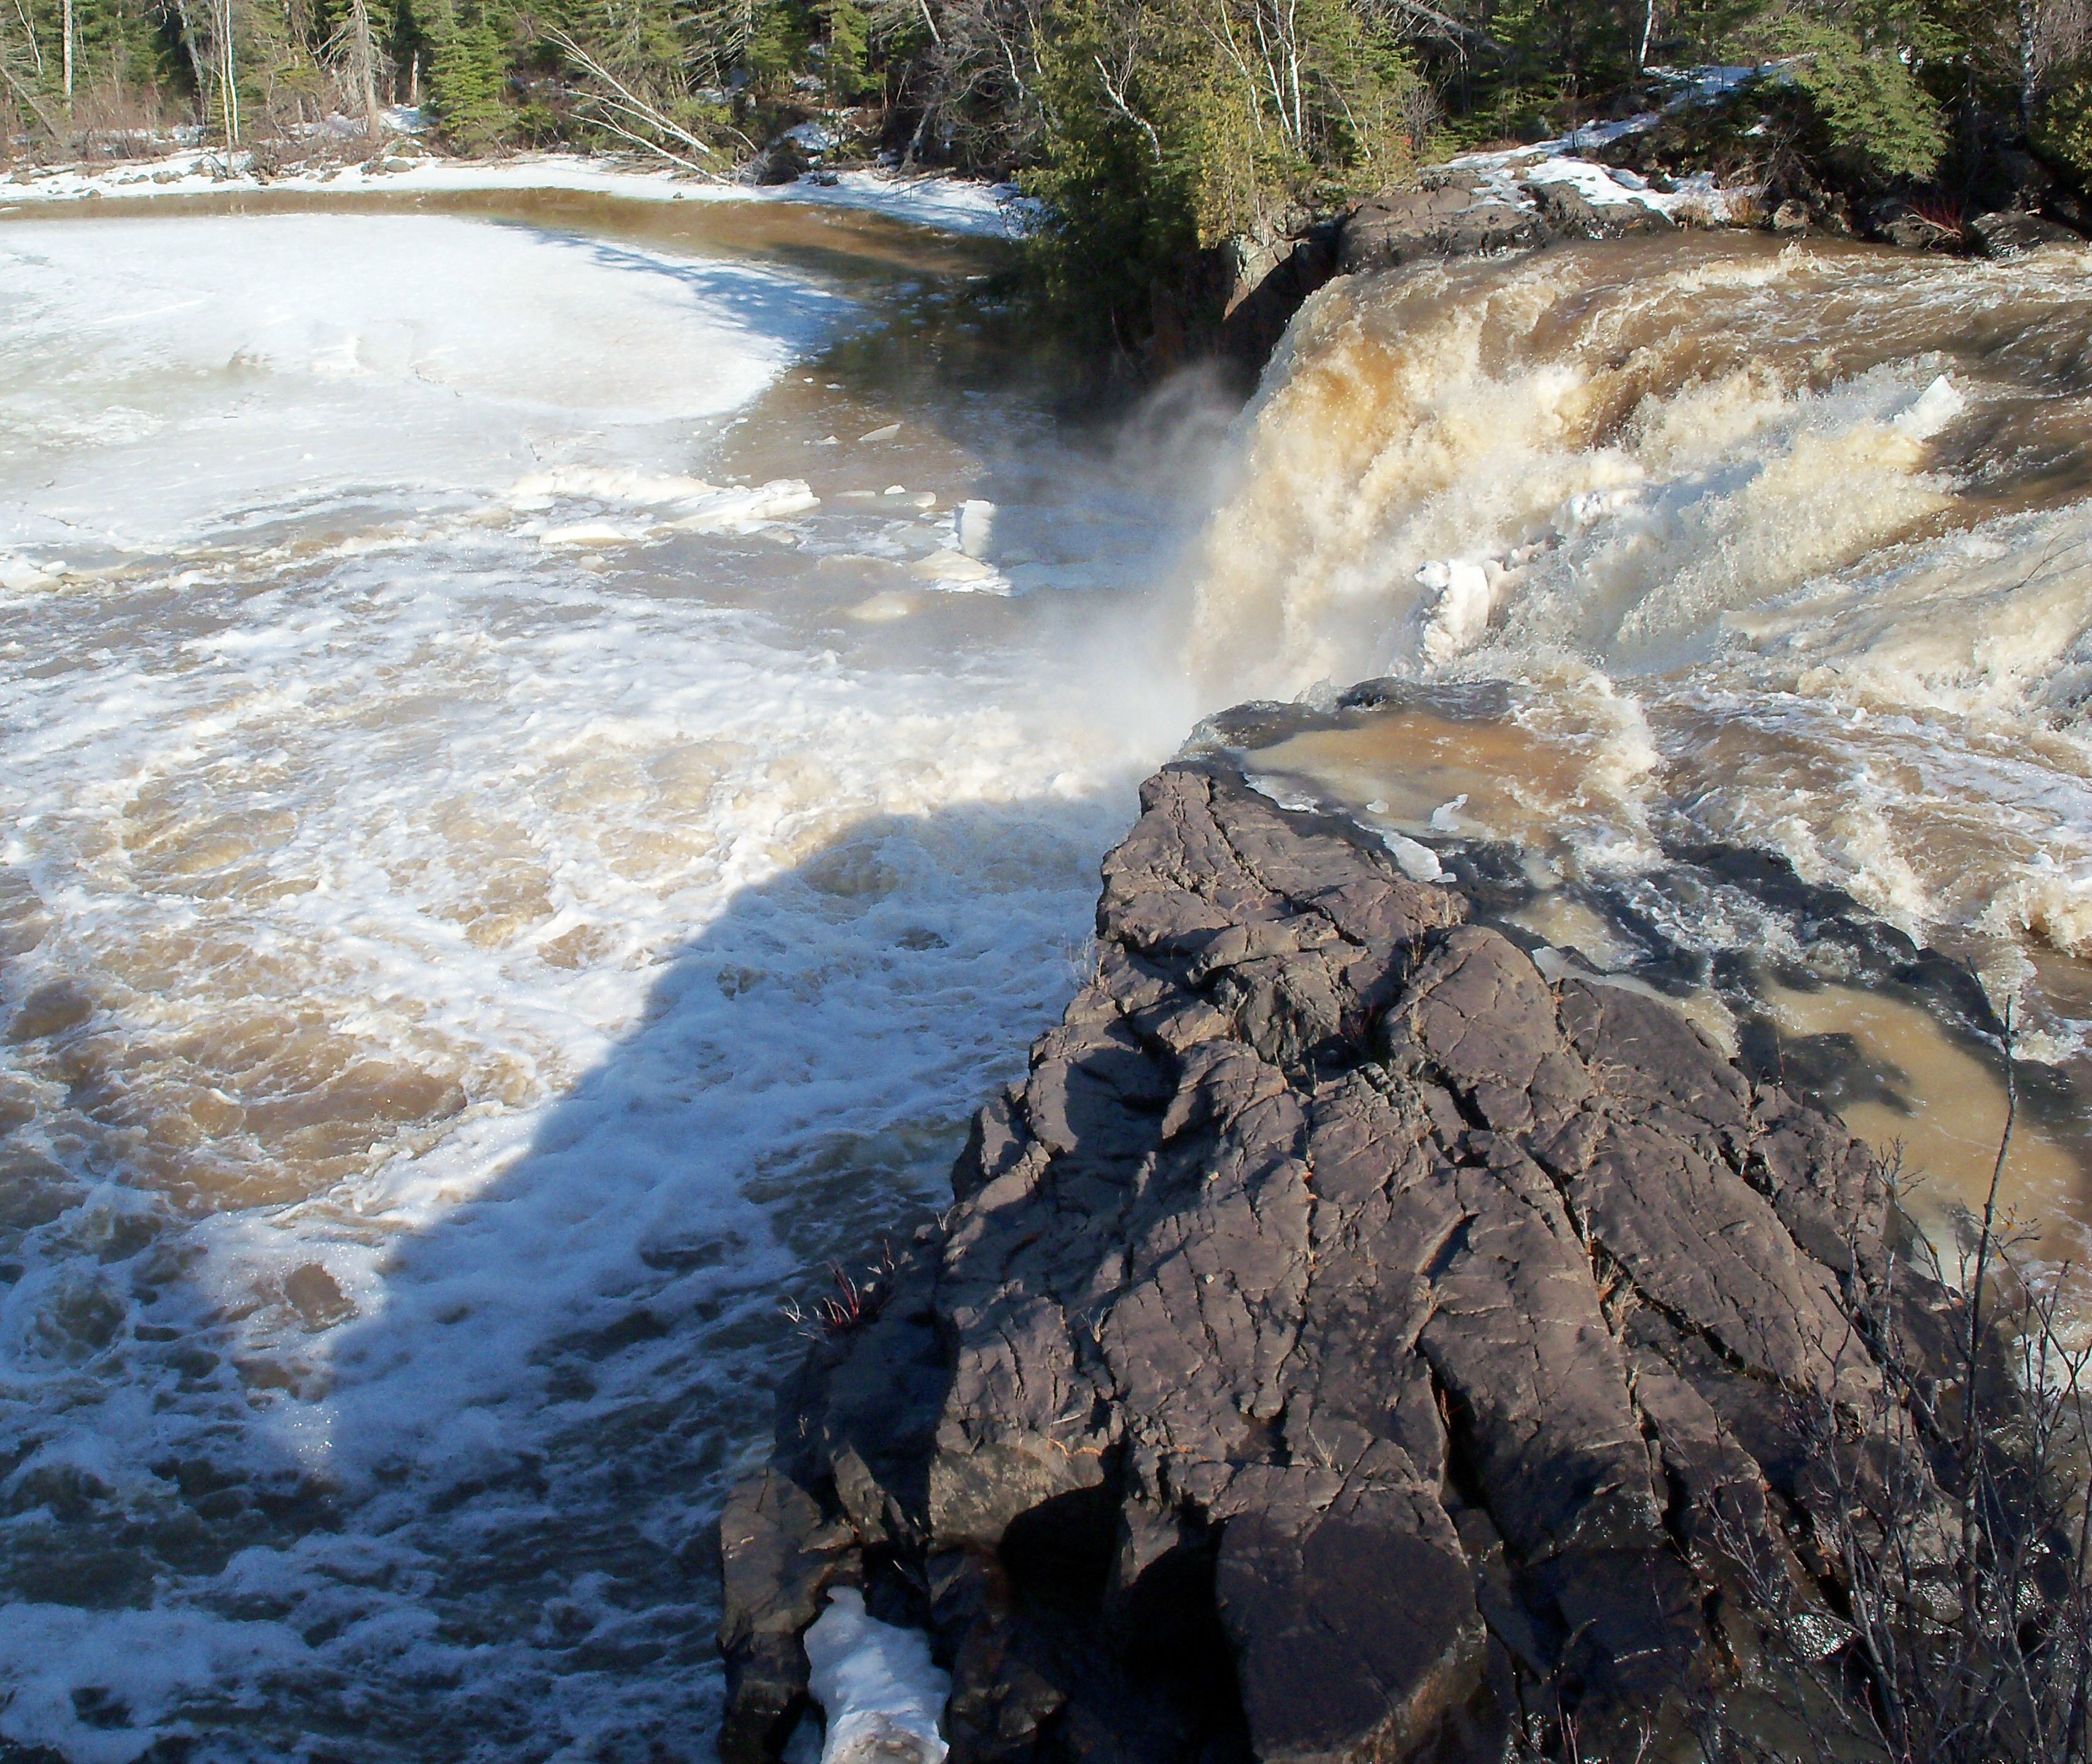 The falls thaw photo